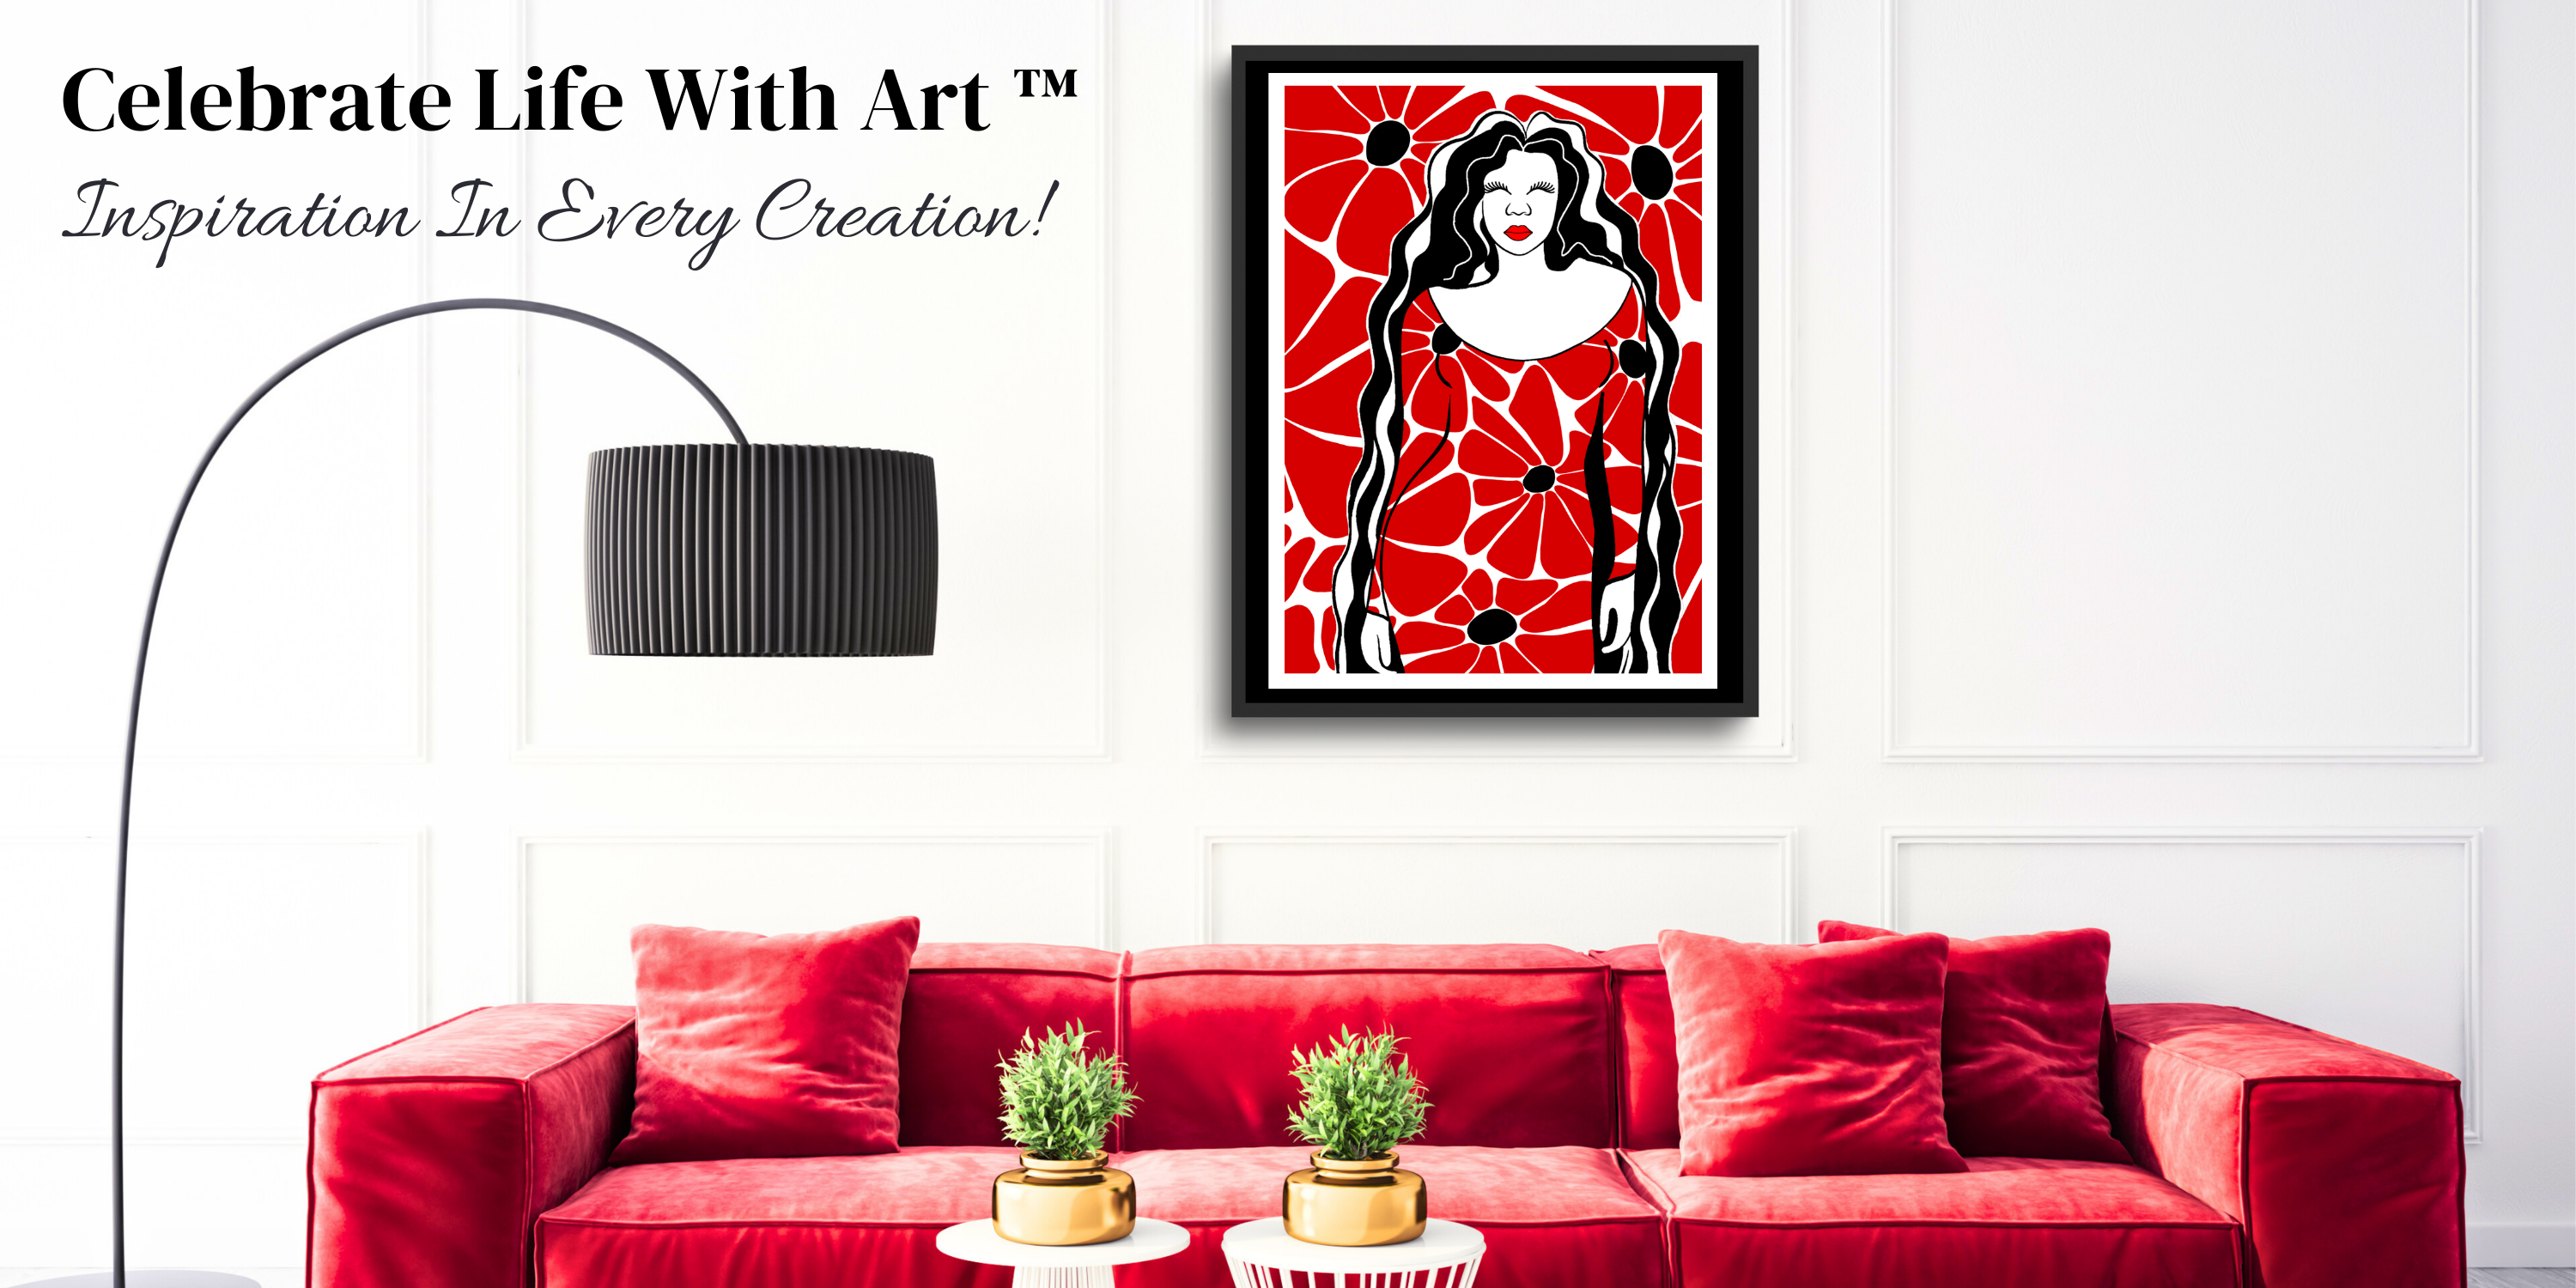 An elegant and feminine woman stands gracefully in a vibrant red floral dress, complemented by a background of matching red floral patterns. This image is presented by Heartfelt Fine Art Greetings® as part of their Celebrate Life With Art™ collection, embodying beauty and femininity.